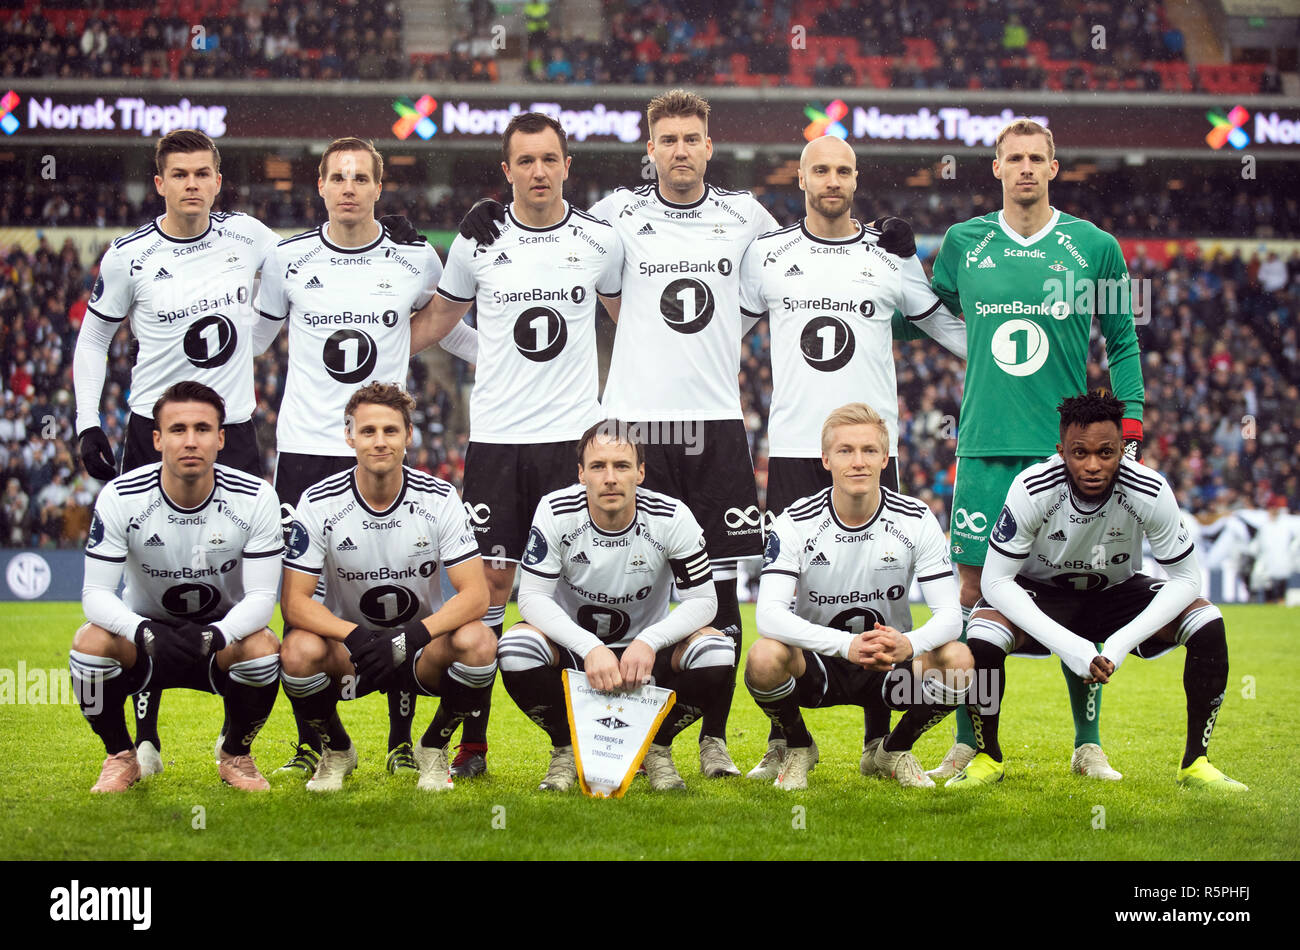 Norway, Oslo. 2nd Dec 2018. The Rosenborg line-up for the Norwegian Cup Final 2018 between Rosenborg and Strømsgodset at Ullevaal Stadion in Oslo. (Photo credit: Gonzales Photo - Jan-Erik Eriksen). Credit: Gonzales Photo/Alamy Live News Stock Photo